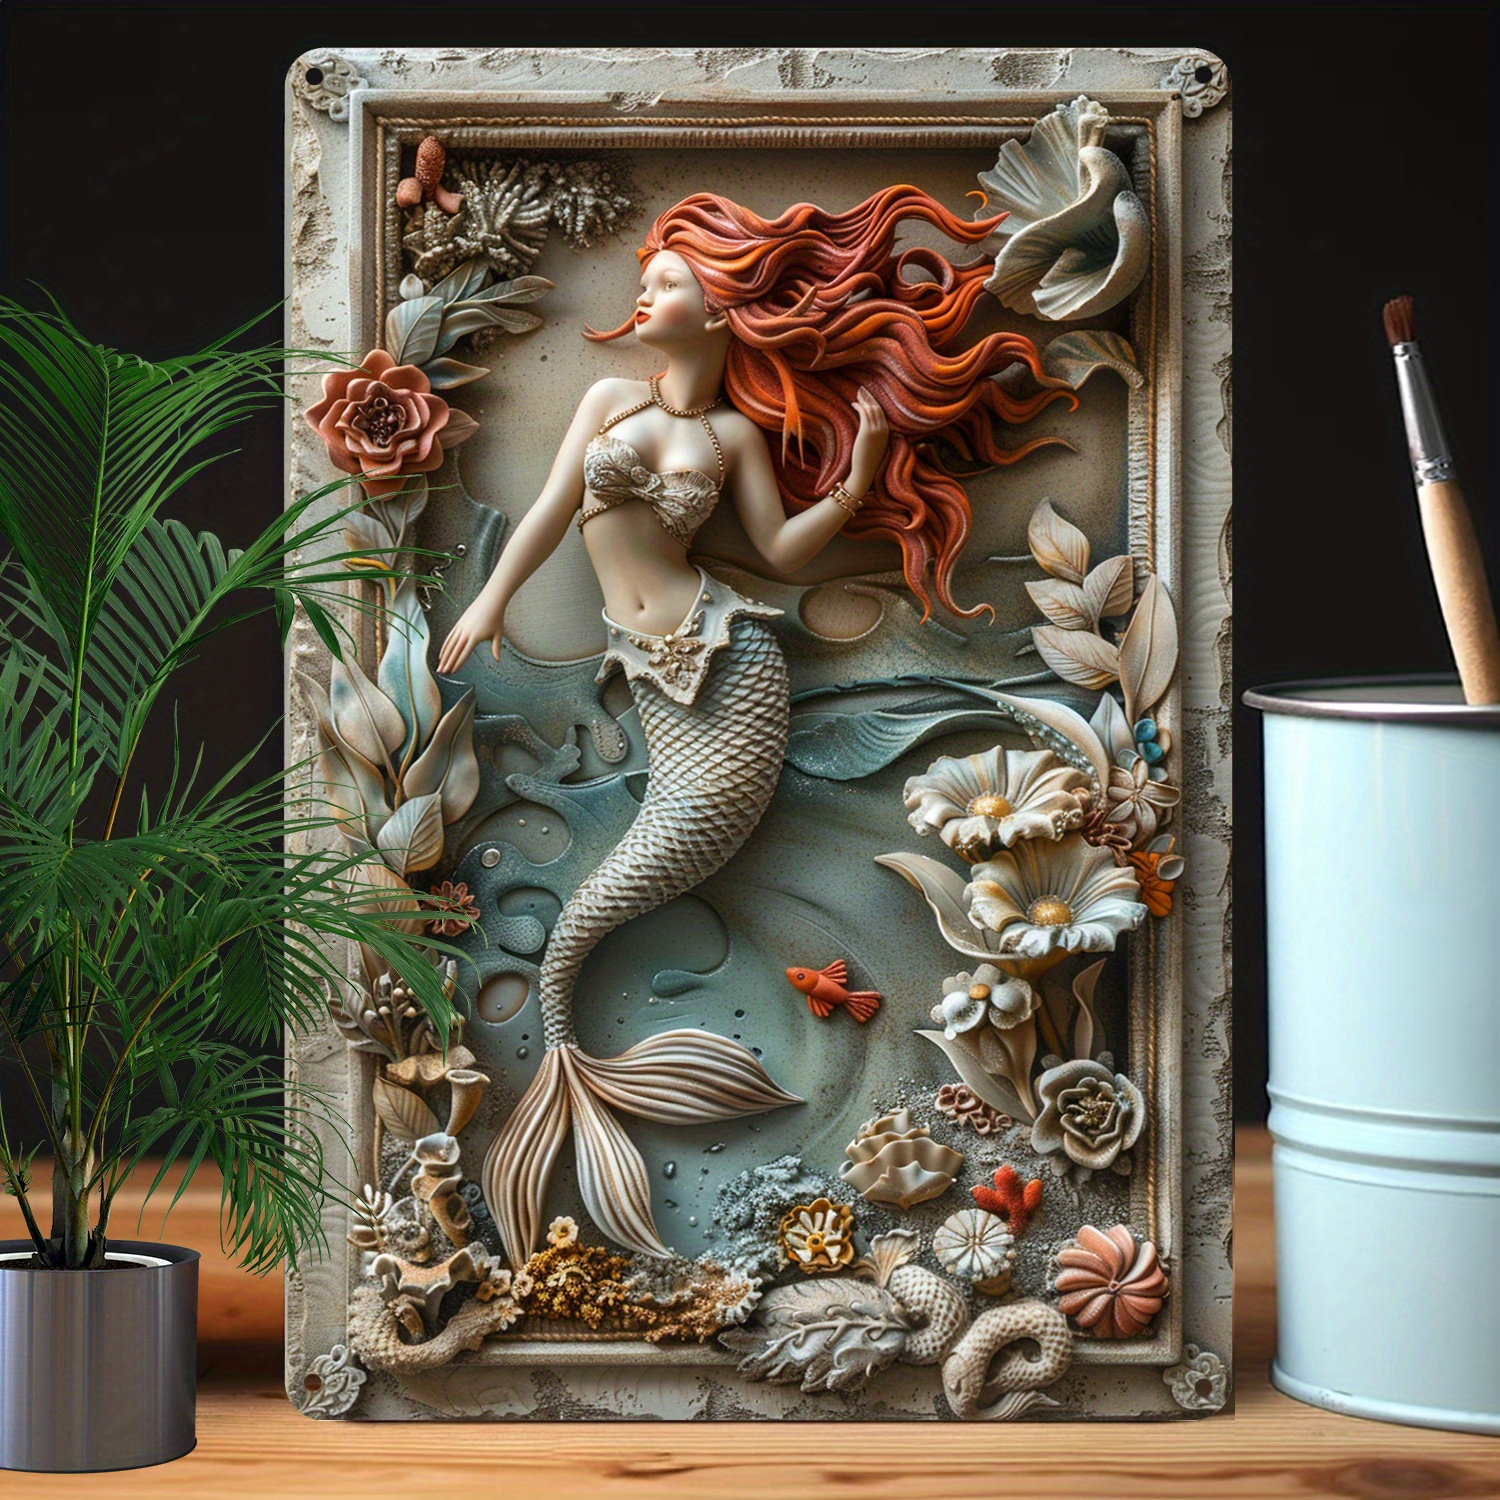 

3d Mermaid Metal Tin Sign Wall Art - 1pc 8x12 Inches Aluminum Decor With Relief Sculpture Design For Indoor & Outdoor - Moisture Resistant, High Durability - Ocean & Marine Life Themed Decor A2481